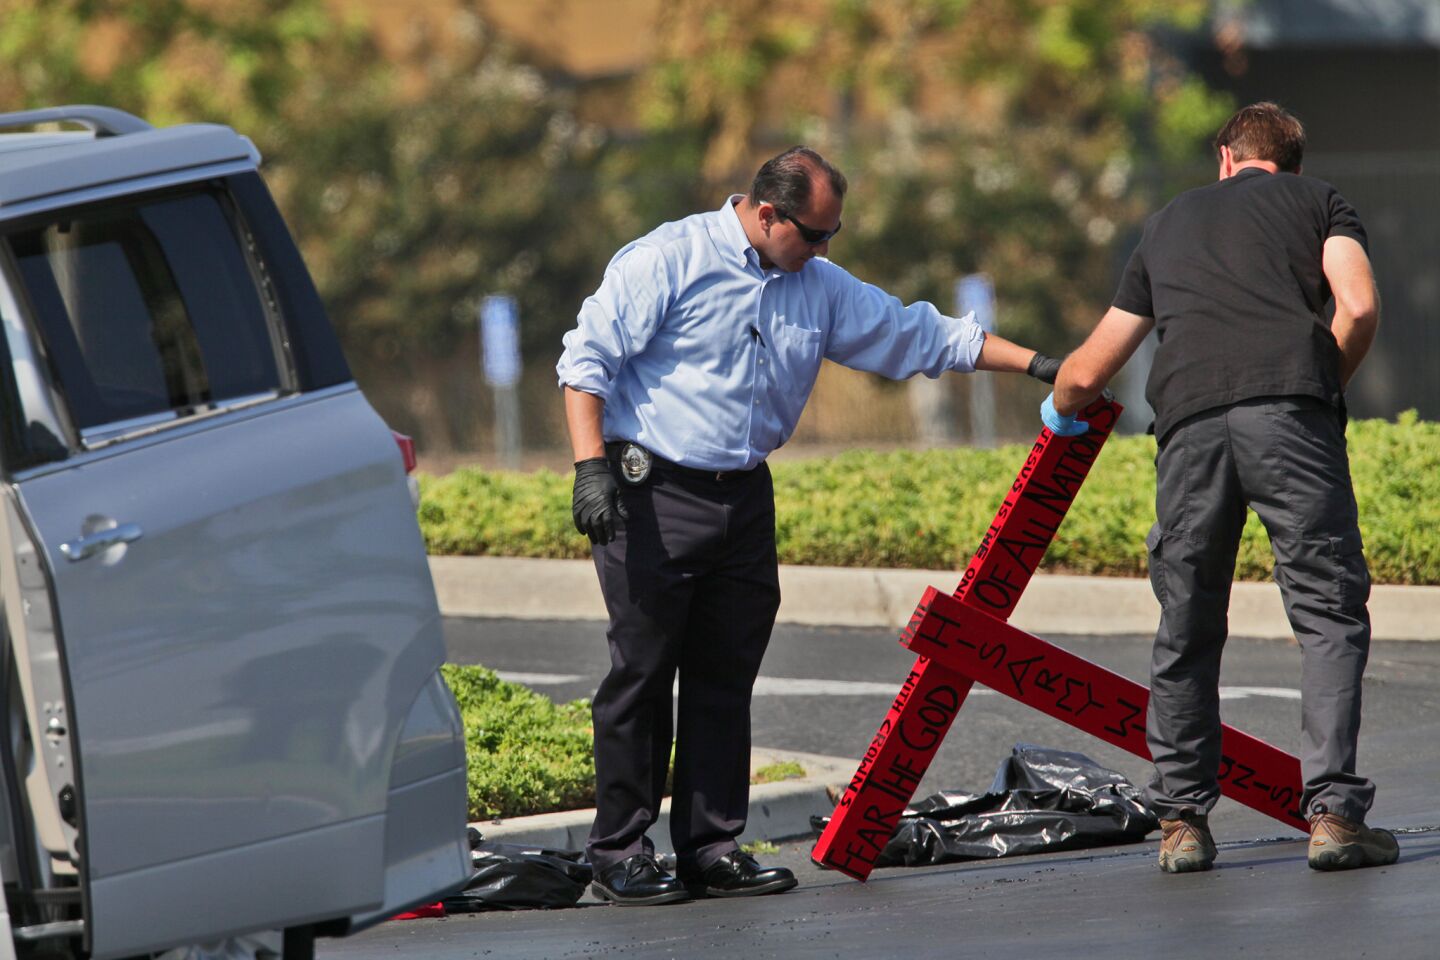 A former Transportation Security Administration screener suspected of making threats to terminals at Los Angeles International Airport was arrested just before midnight while sitting in a van that was parked at the Harvest Church, at Urban Street and Arlington Avenue in Riverside. FBI and Riverside police investigators gather evidence from the van and around it on Wednesday morning.